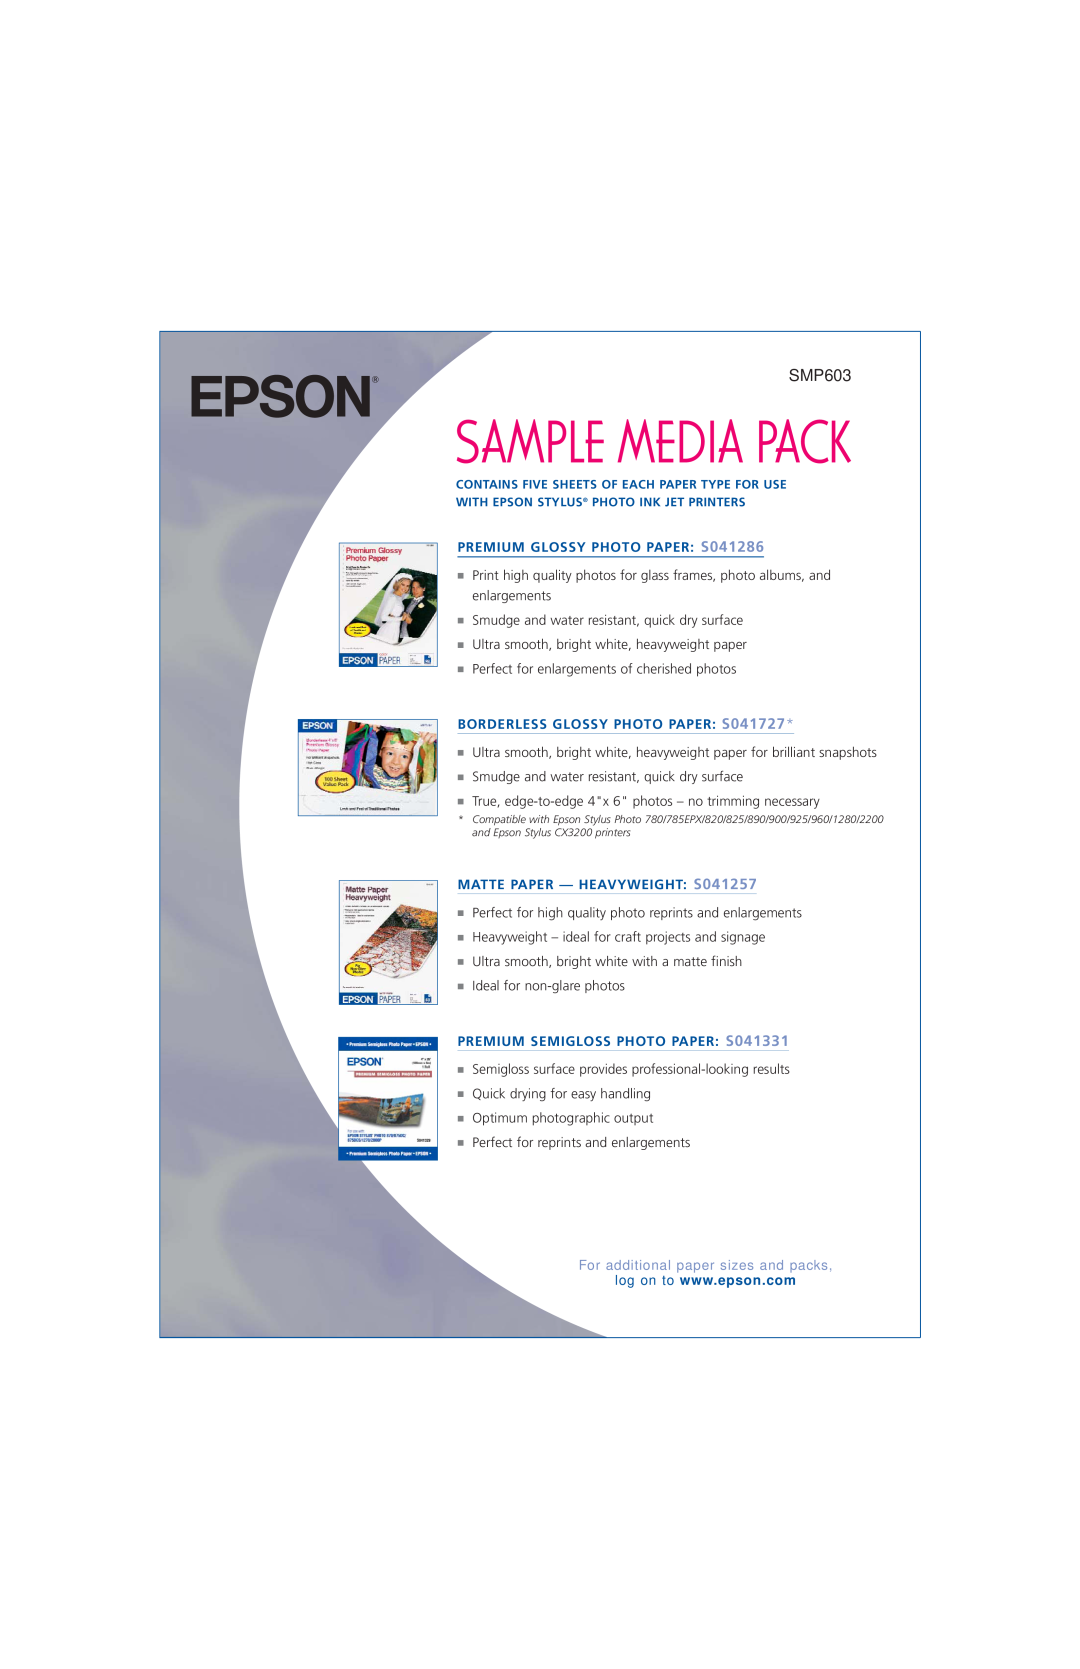 Epson SMP603 manual Sample Media Pack, PREMIUM GLOSSY PHOTO PAPER S041286, BORDERLESS GLOSSY PHOTO PAPER S041727 